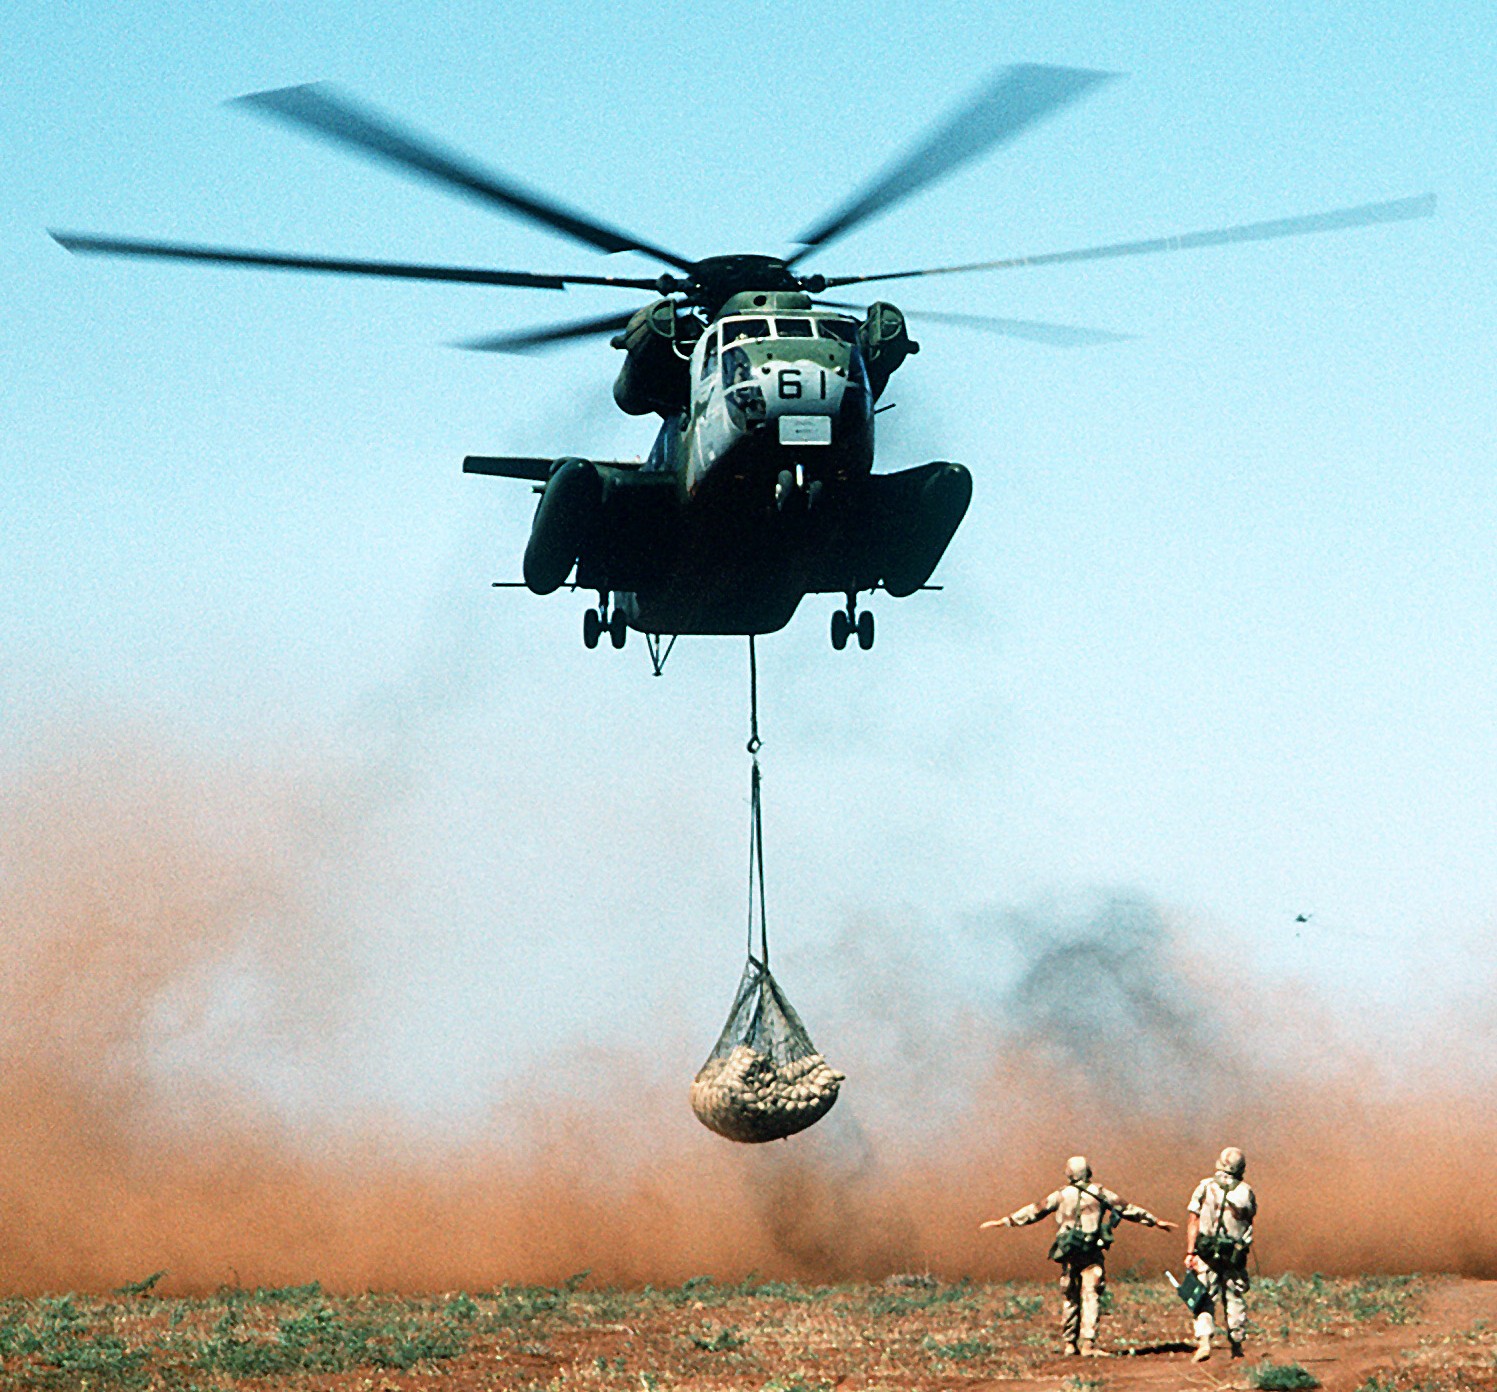 hmh-363 red lions marine heavy helicopter squadron usmc sikorsky ch-53d sea stallion 45 somalia 1993